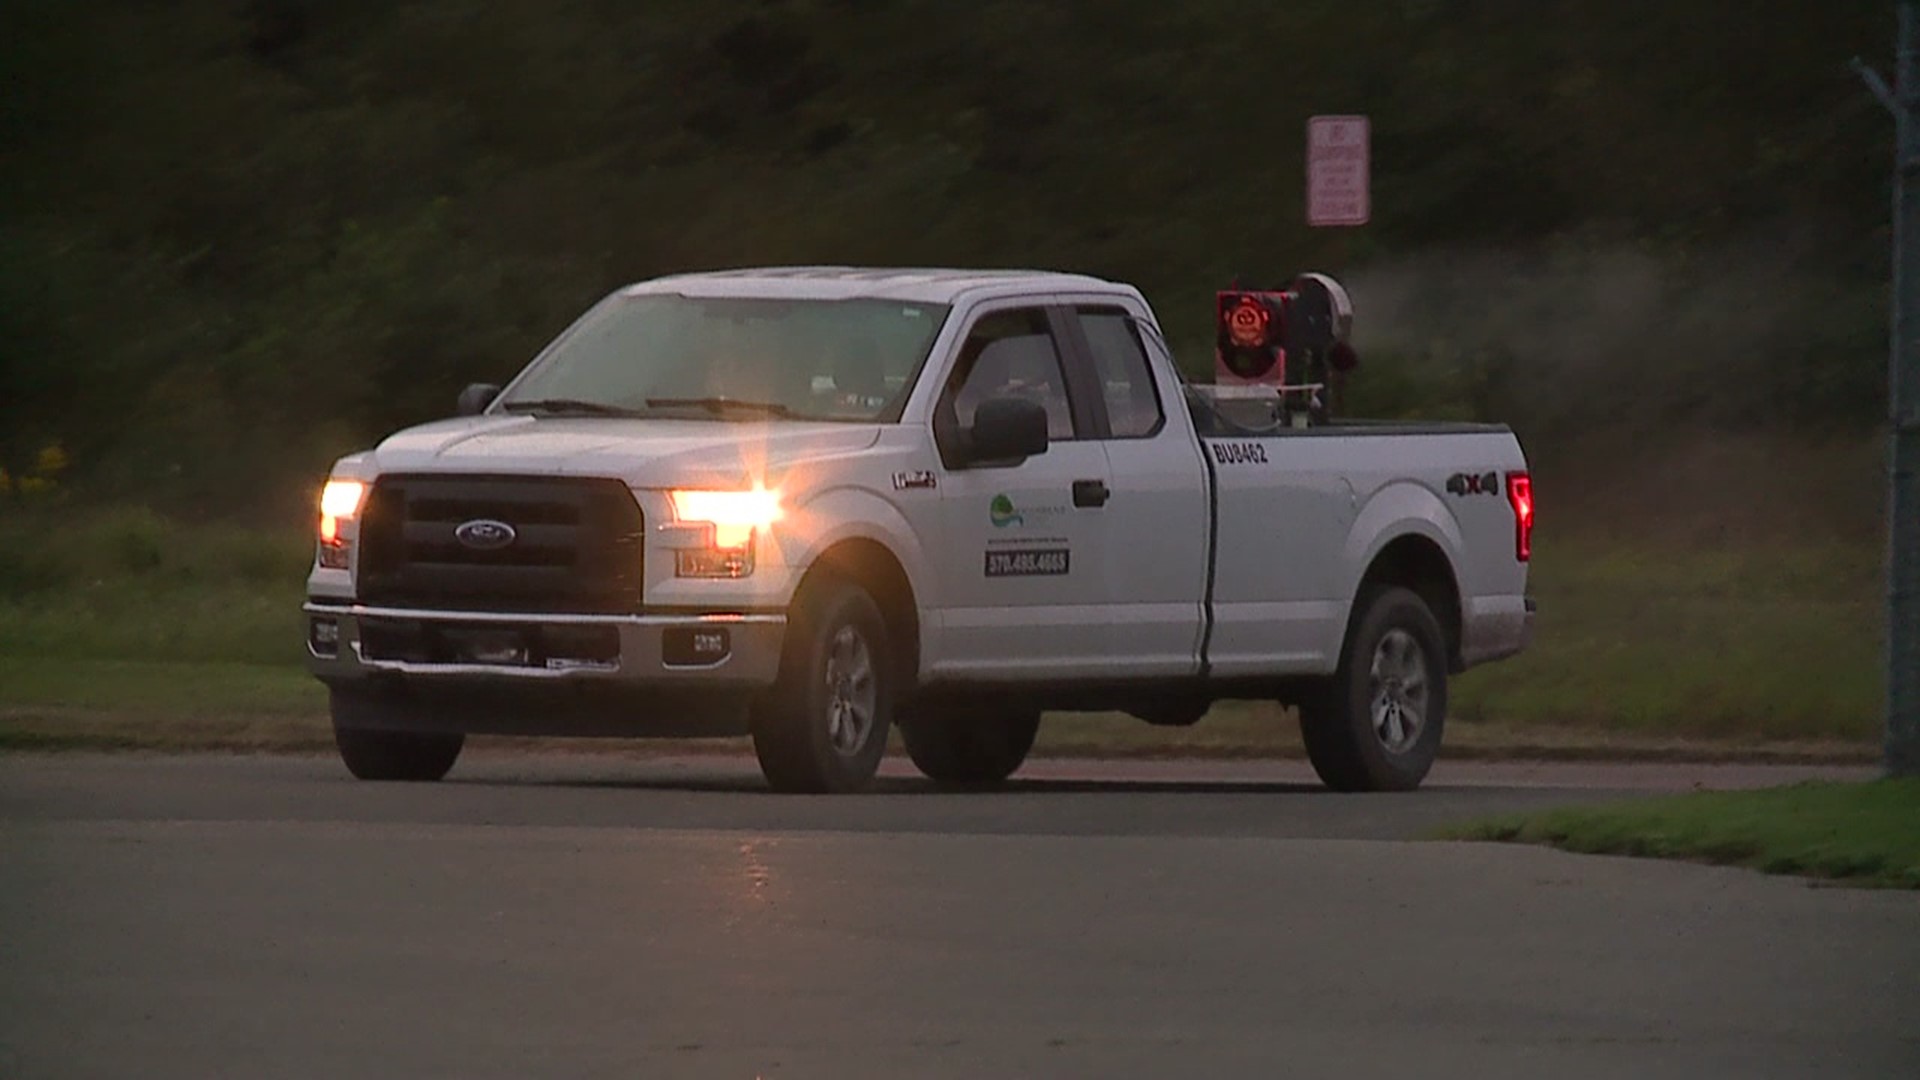 A special truck was battling back the infestation of mosquitoes caused by floodwaters left from Hurricane Ida.